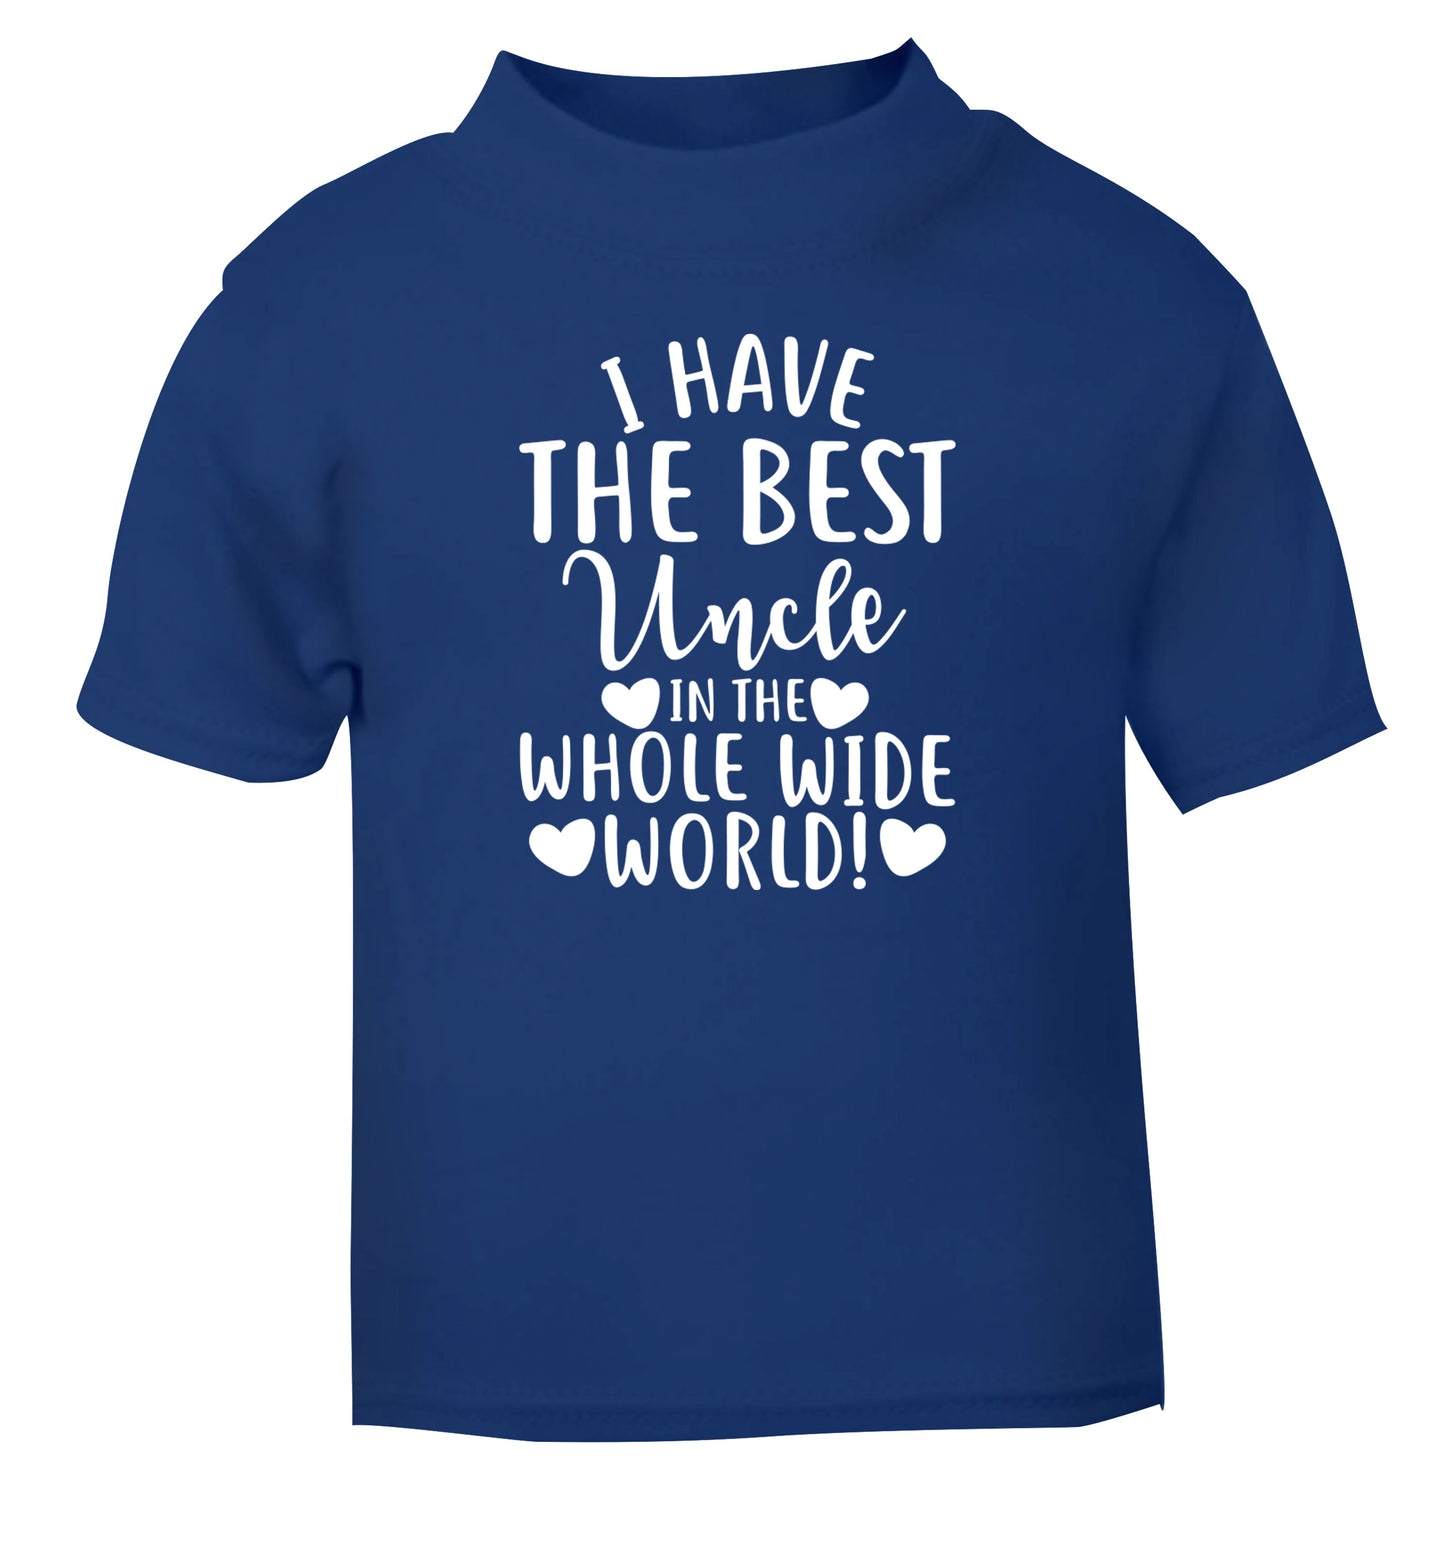 I have the best uncle in the whole wide world! blue Baby Toddler Tshirt 2 Years